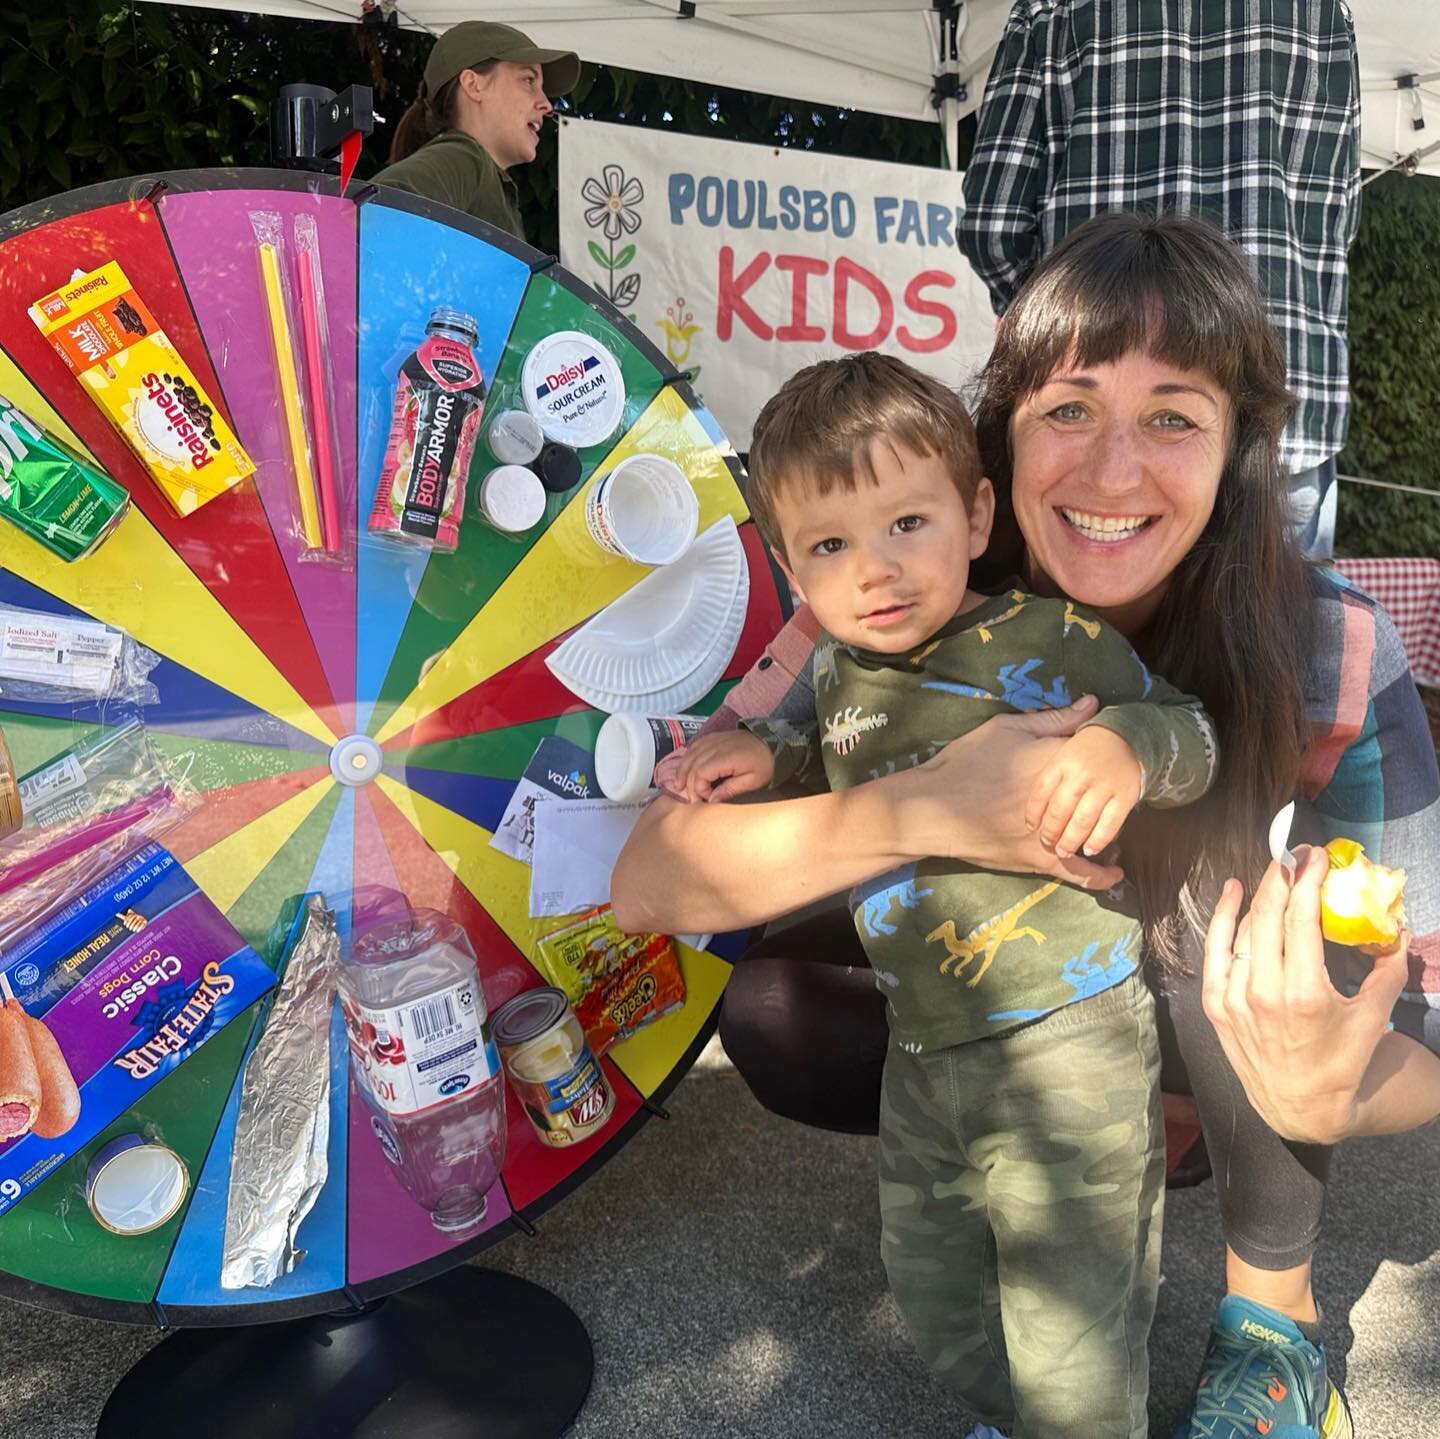 We are really lucking out with these gorgeous market days! Here&rsquo;s a peek @ last week, including our last Kids Club. 

Tomorrow, catch the partial solar eclipse until 10:40AM! Don&rsquo;t forget protective eyewear.  Get your fixes from @cedarcof